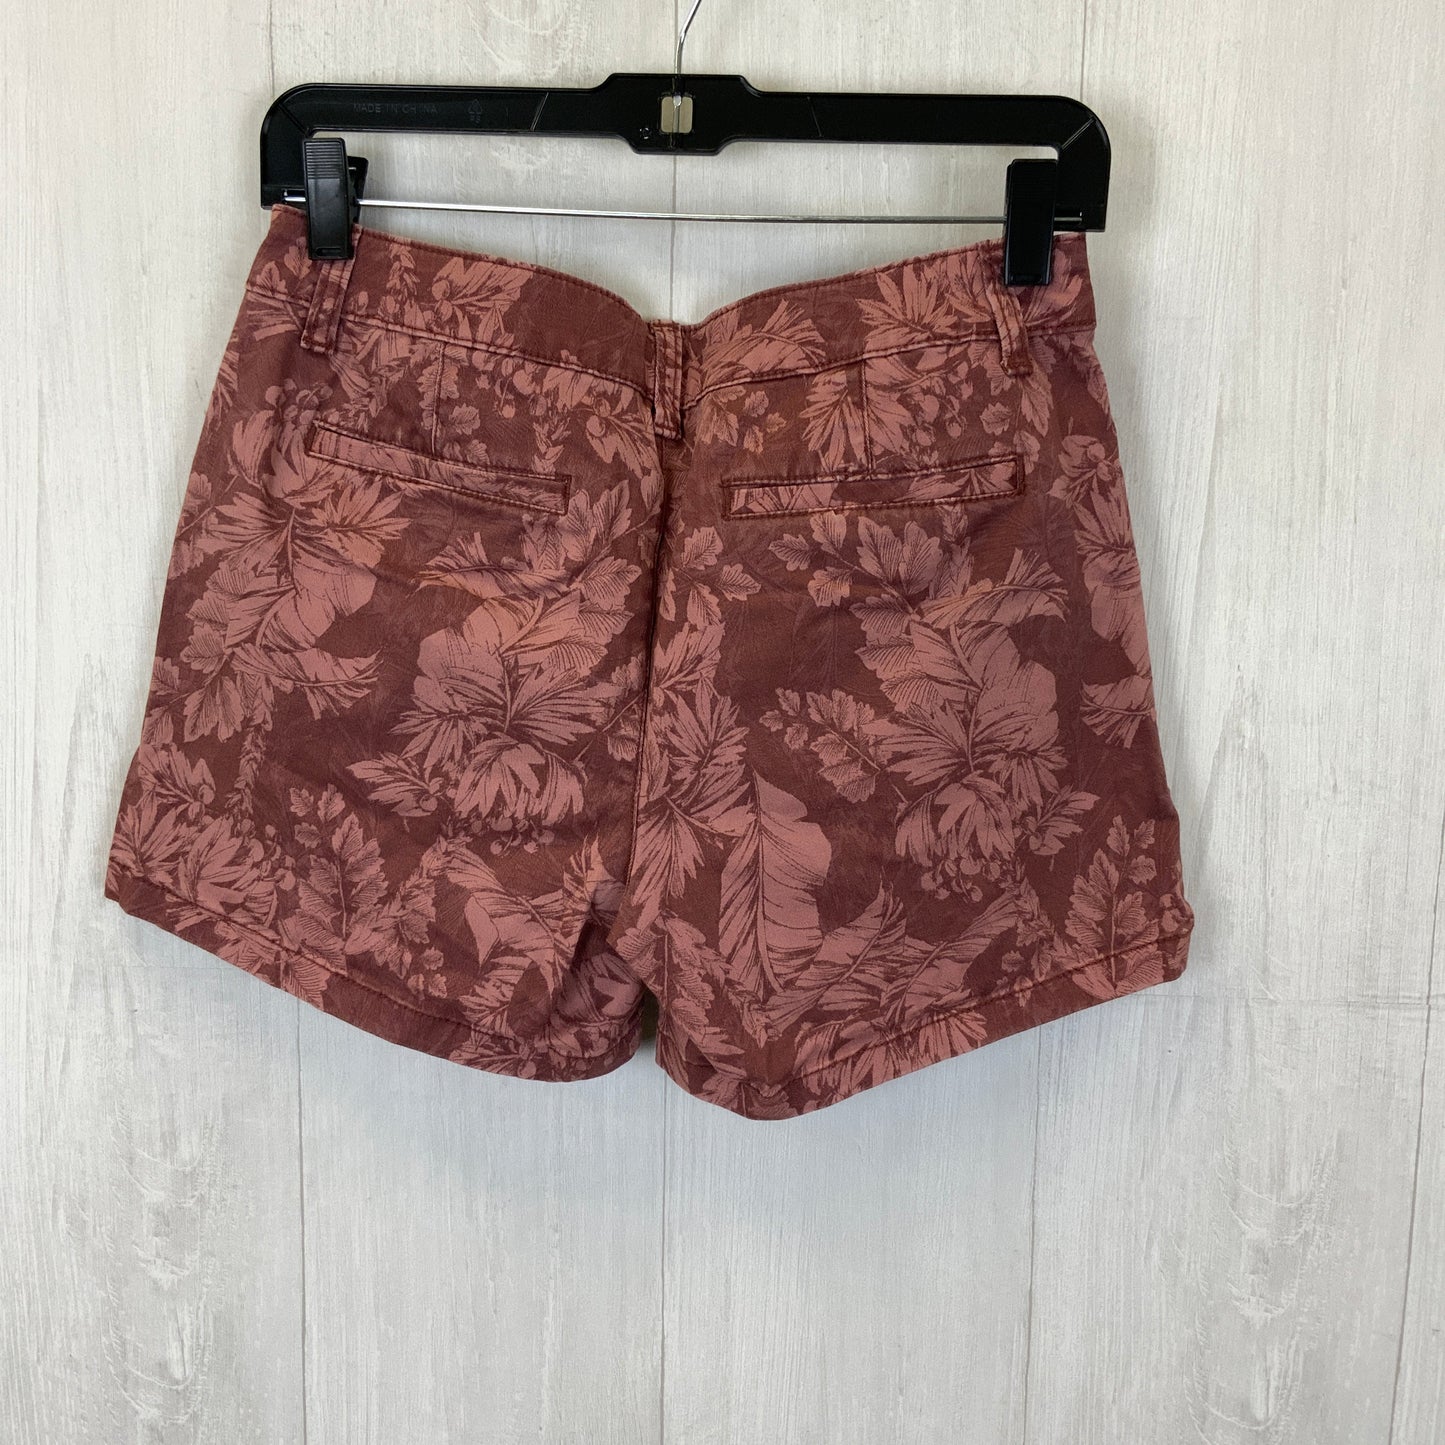 Red Shorts Ana, Size 2